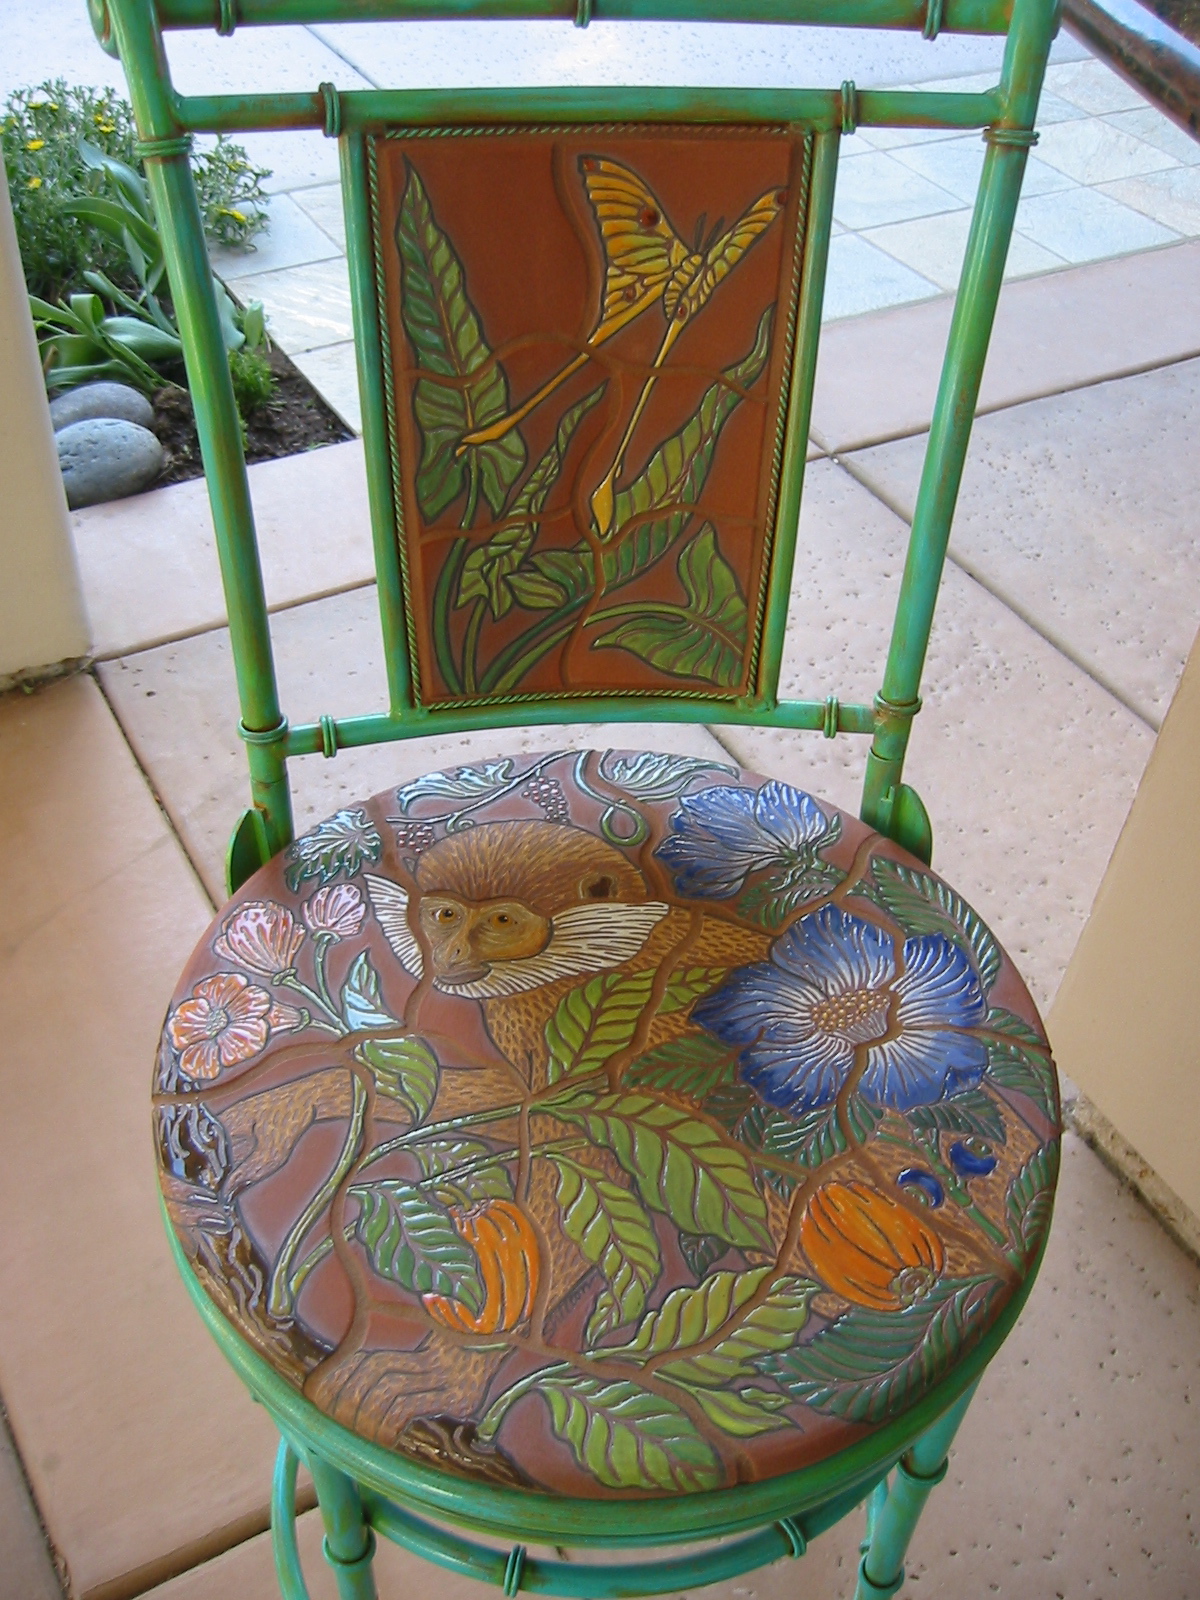 Colorful Ceramic Barstool with Tropical Monkey Design